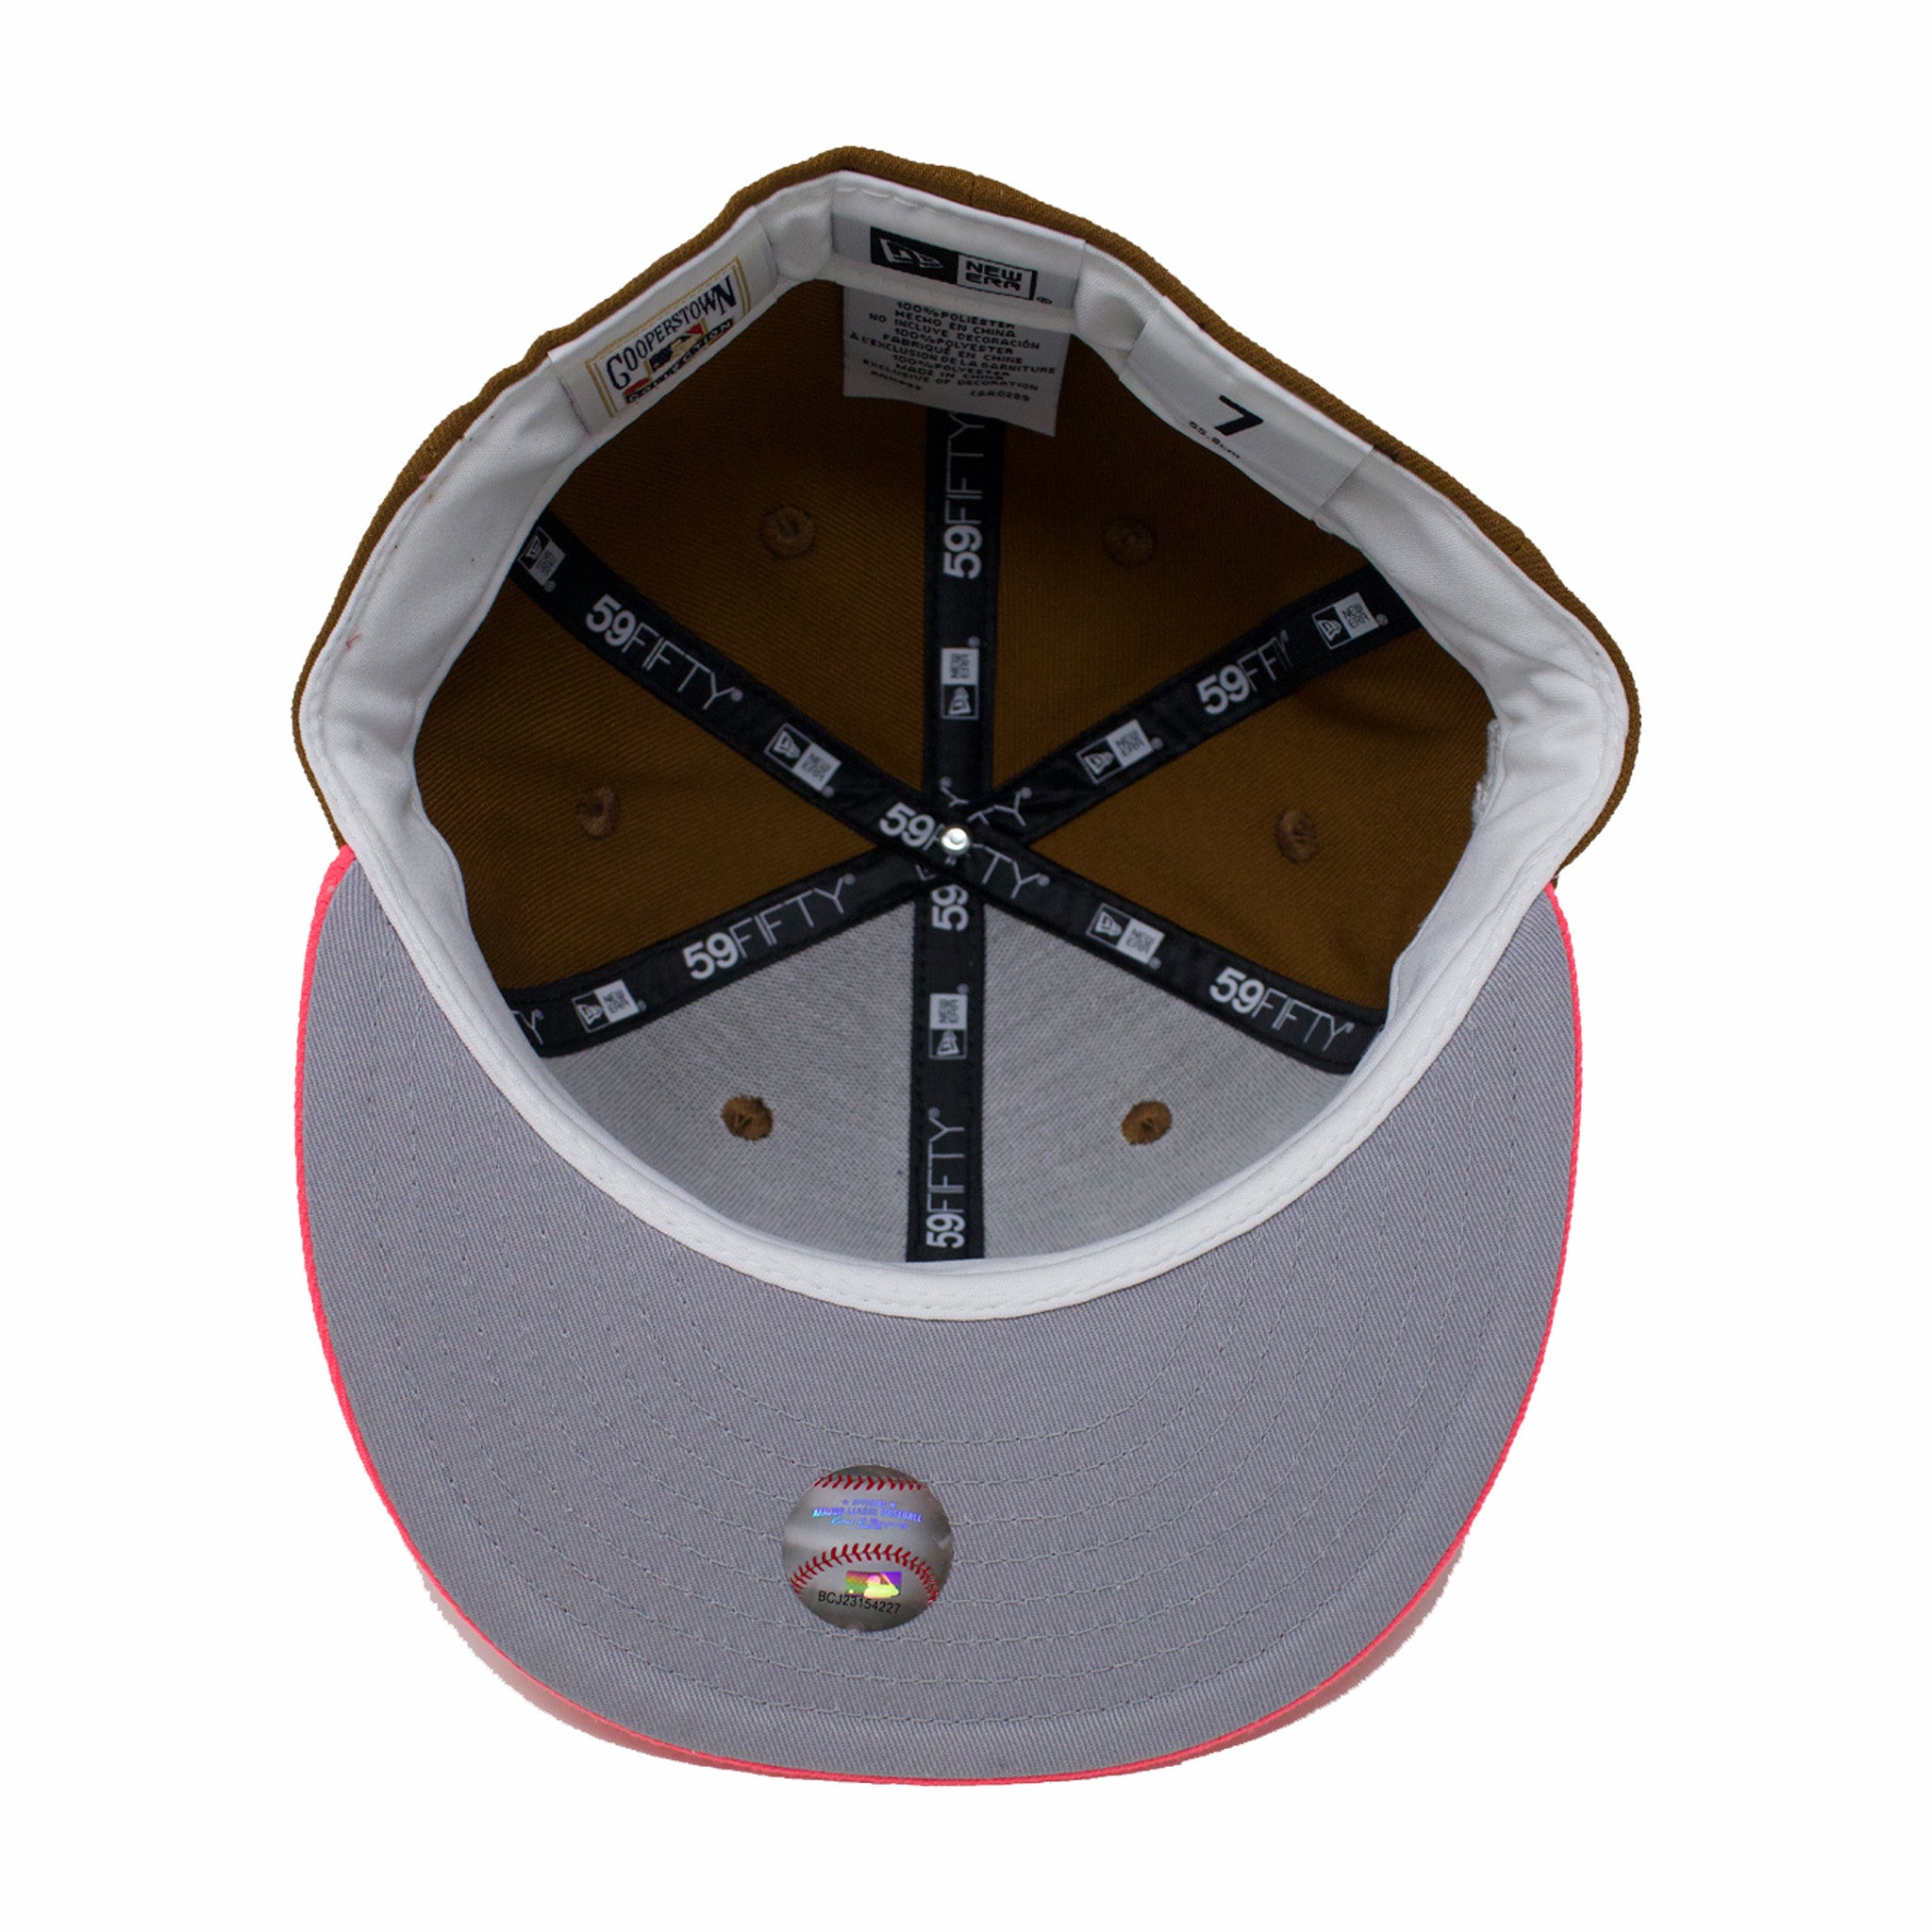 New Era x August New York Mets &quot;The Jacket&quot; 59FIFTY (Walnut) - August Shop